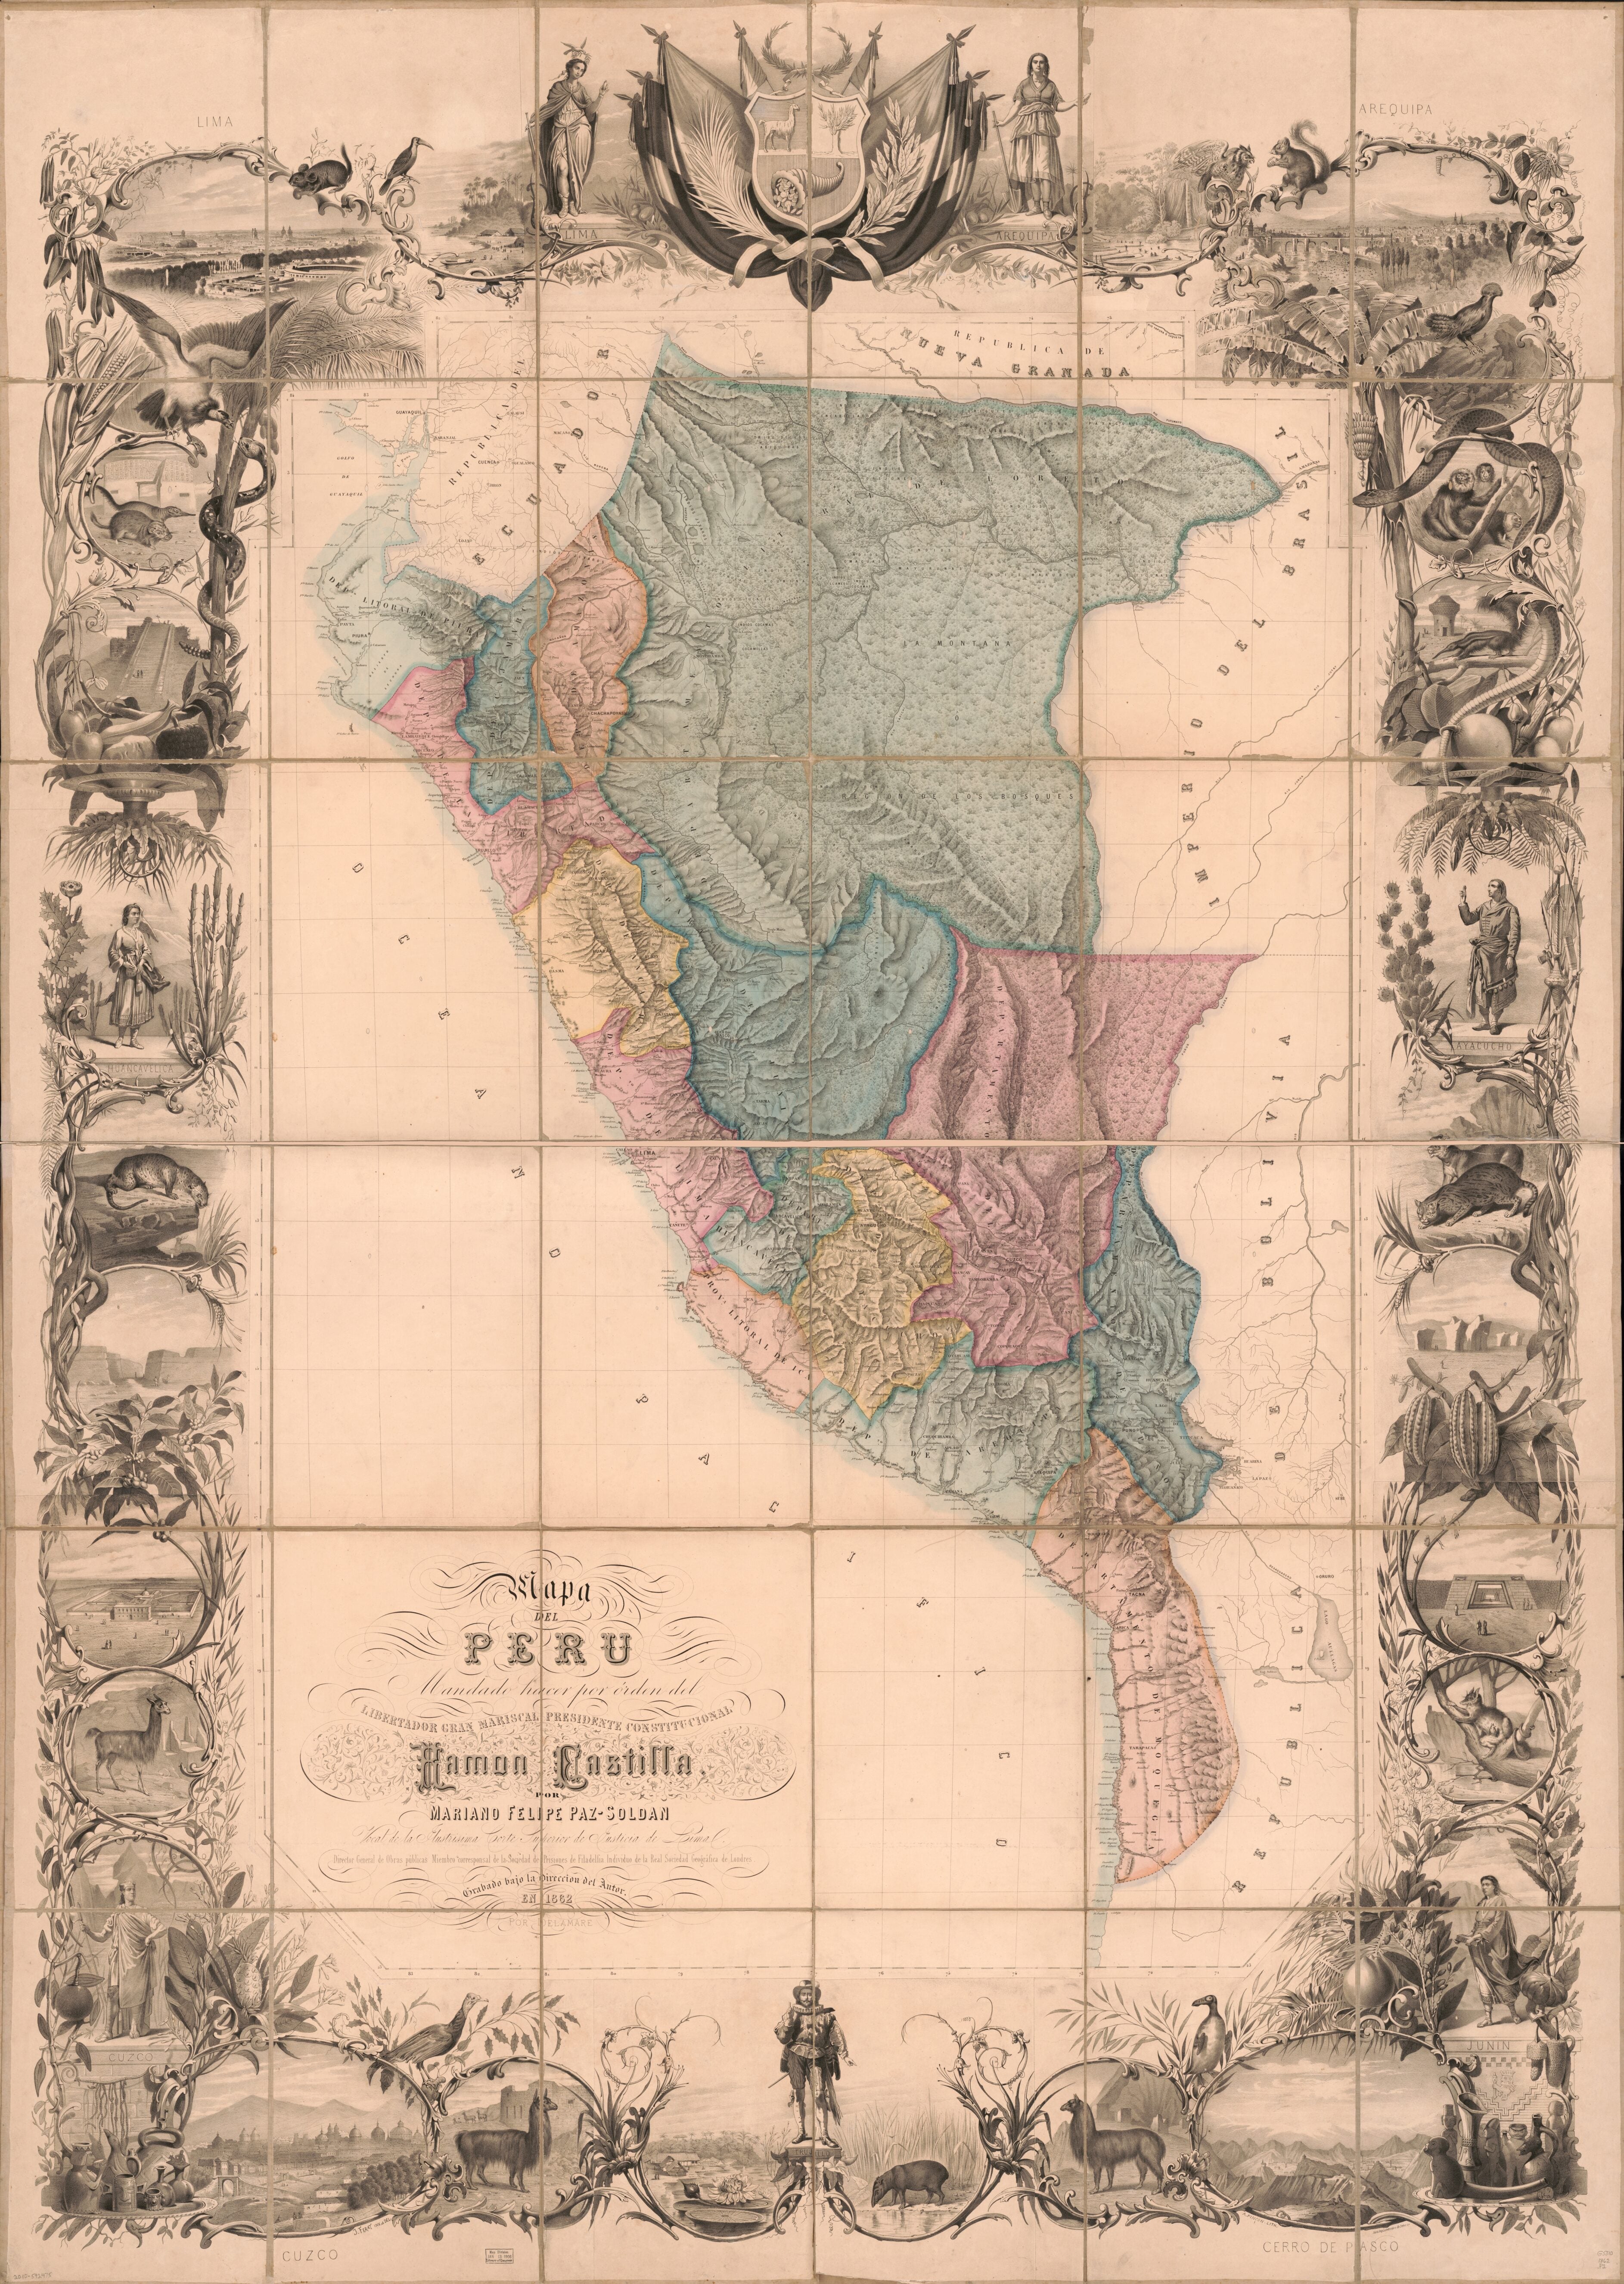 This old map of Mapa Del Peru from 1862 was created by F. Delamare, Mariano Felipe Paz Soldan in 1862